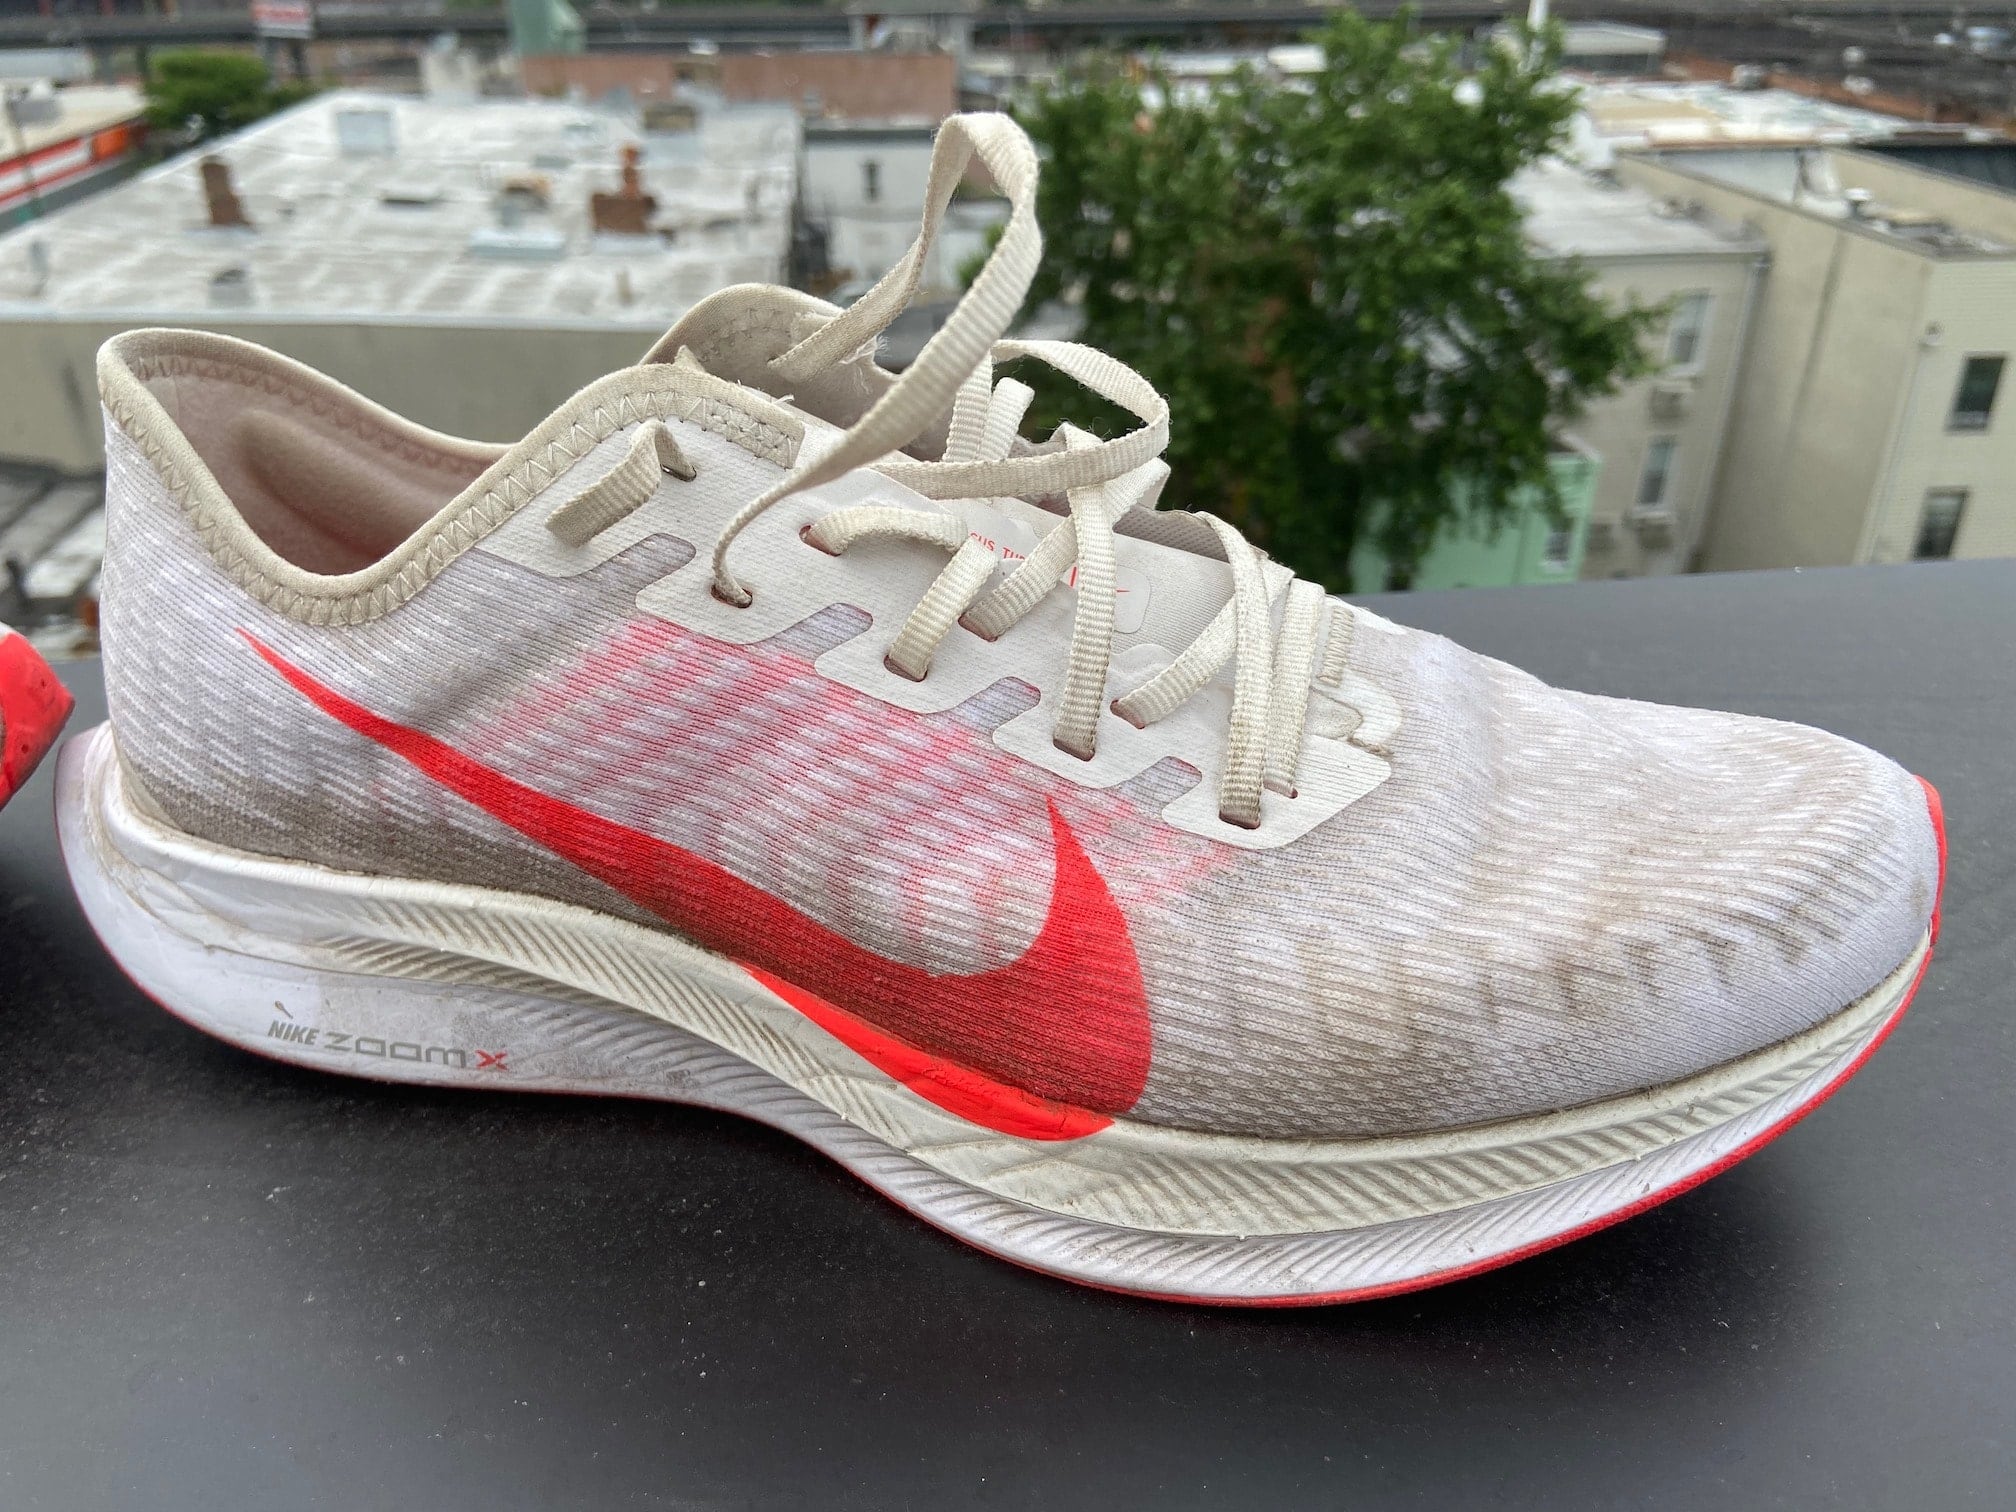 Picture of a pair of Nike Zoom Pegasus Turbo 2